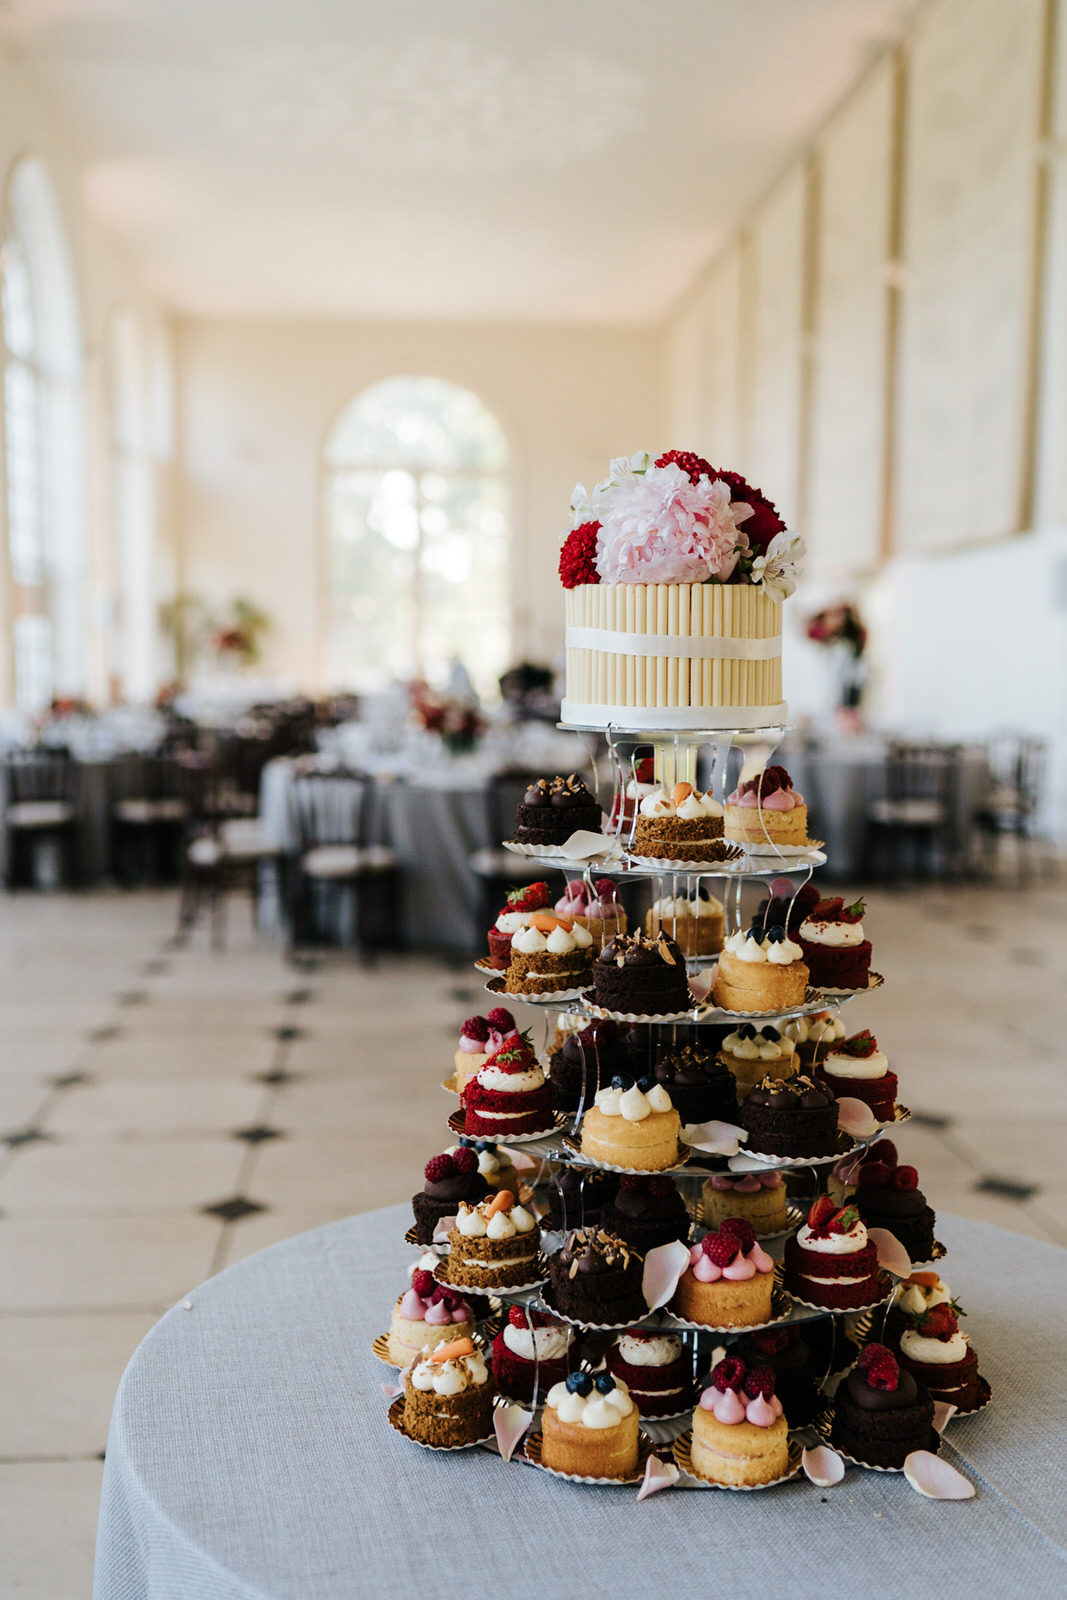  Photograph of wedding cake which is actually made up of many smaller cakes 